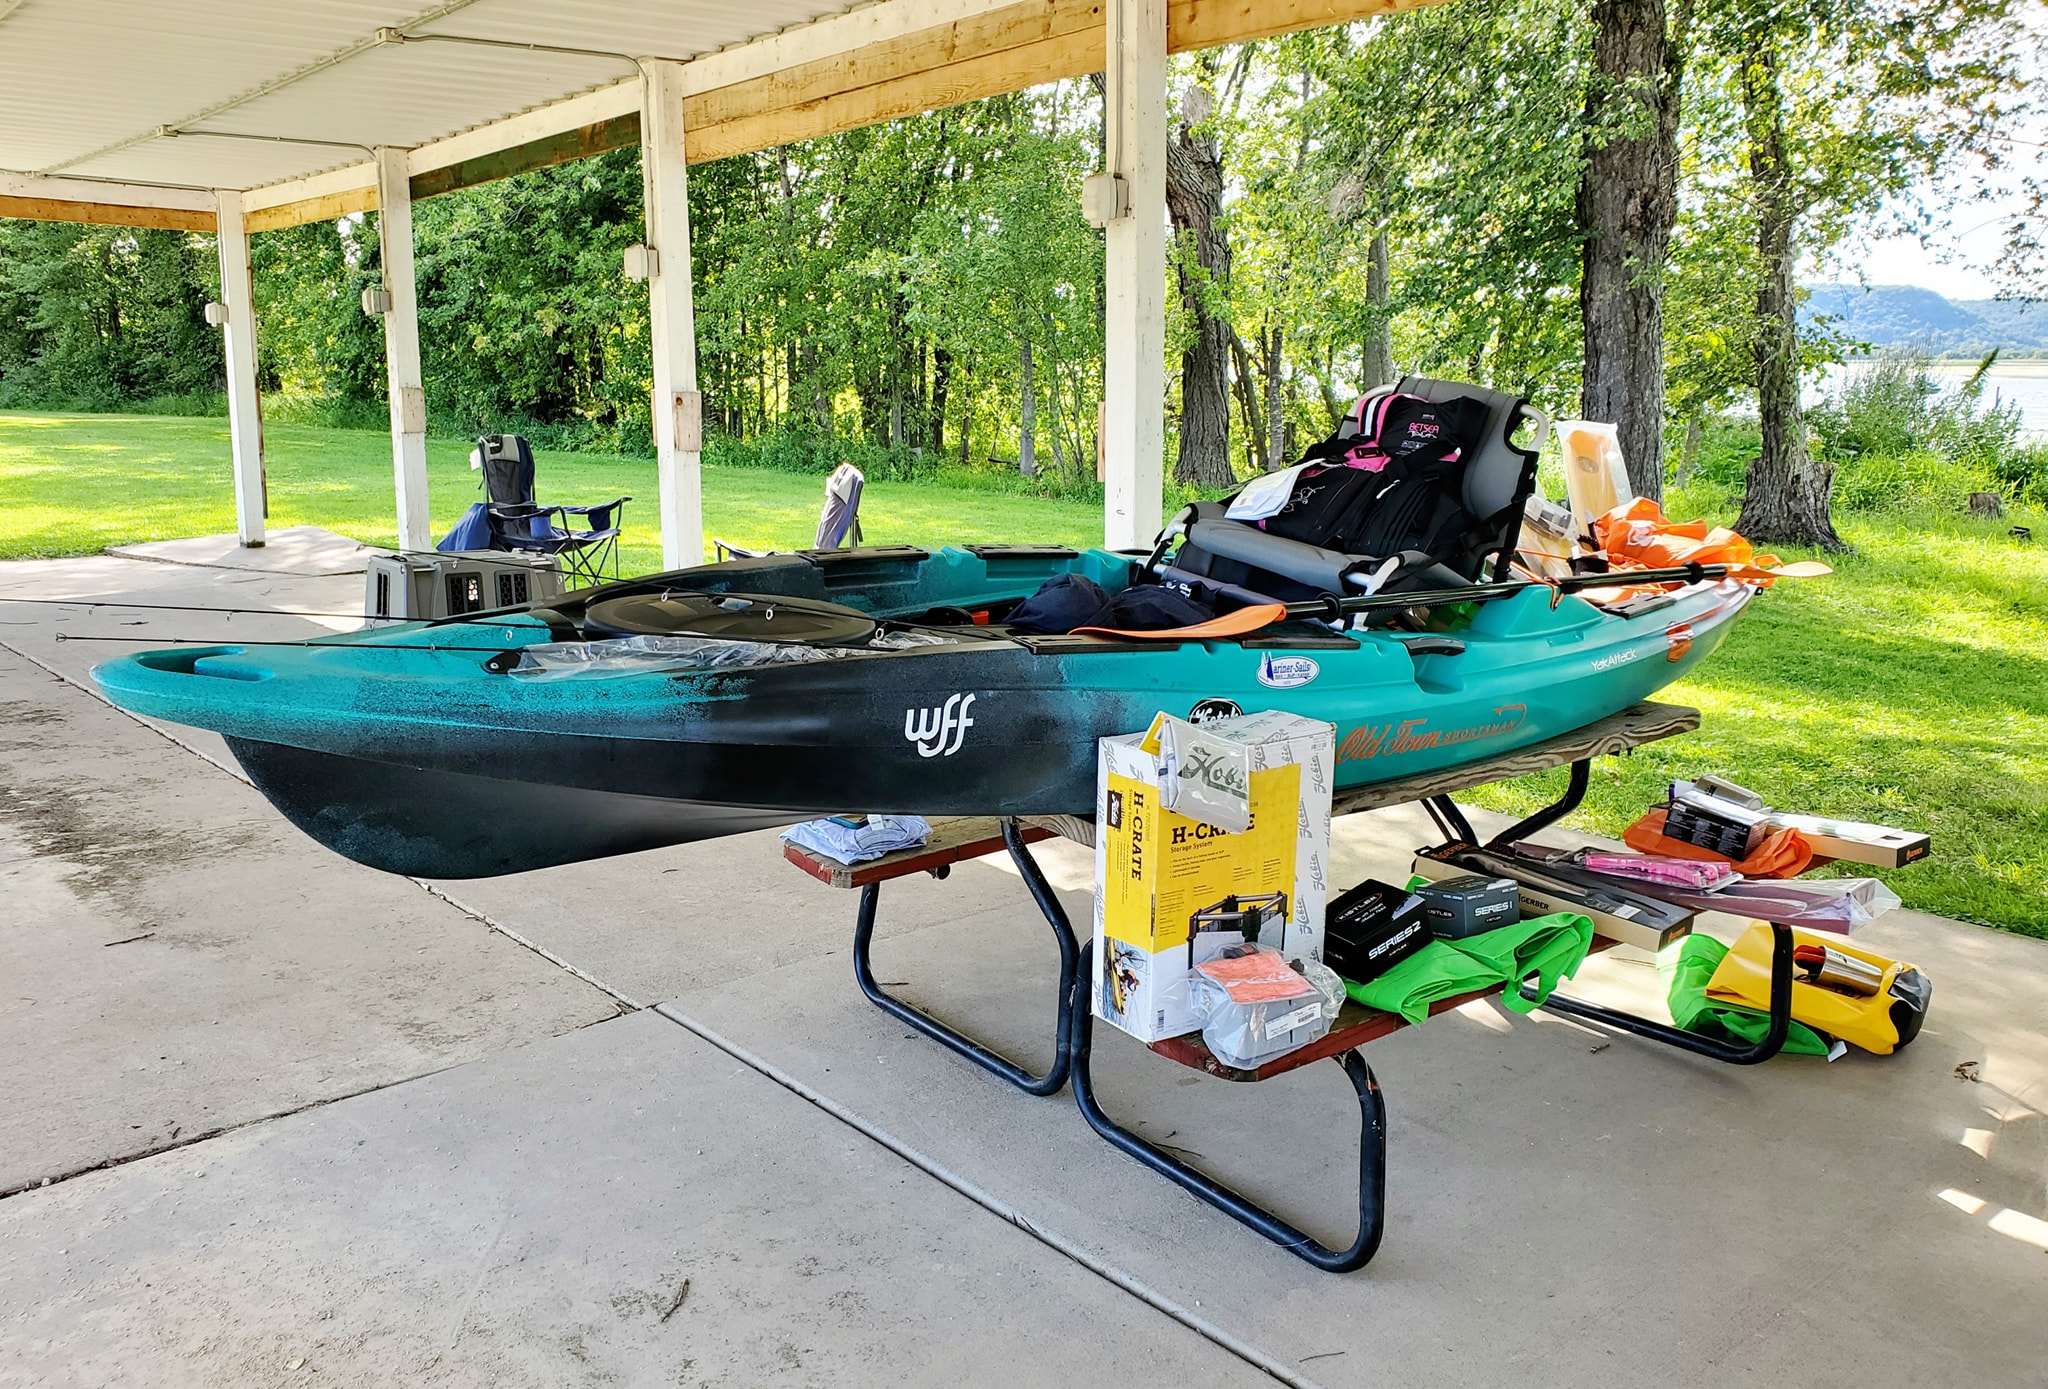 An Old Town Bigwater kayak and other prizes donated for the event